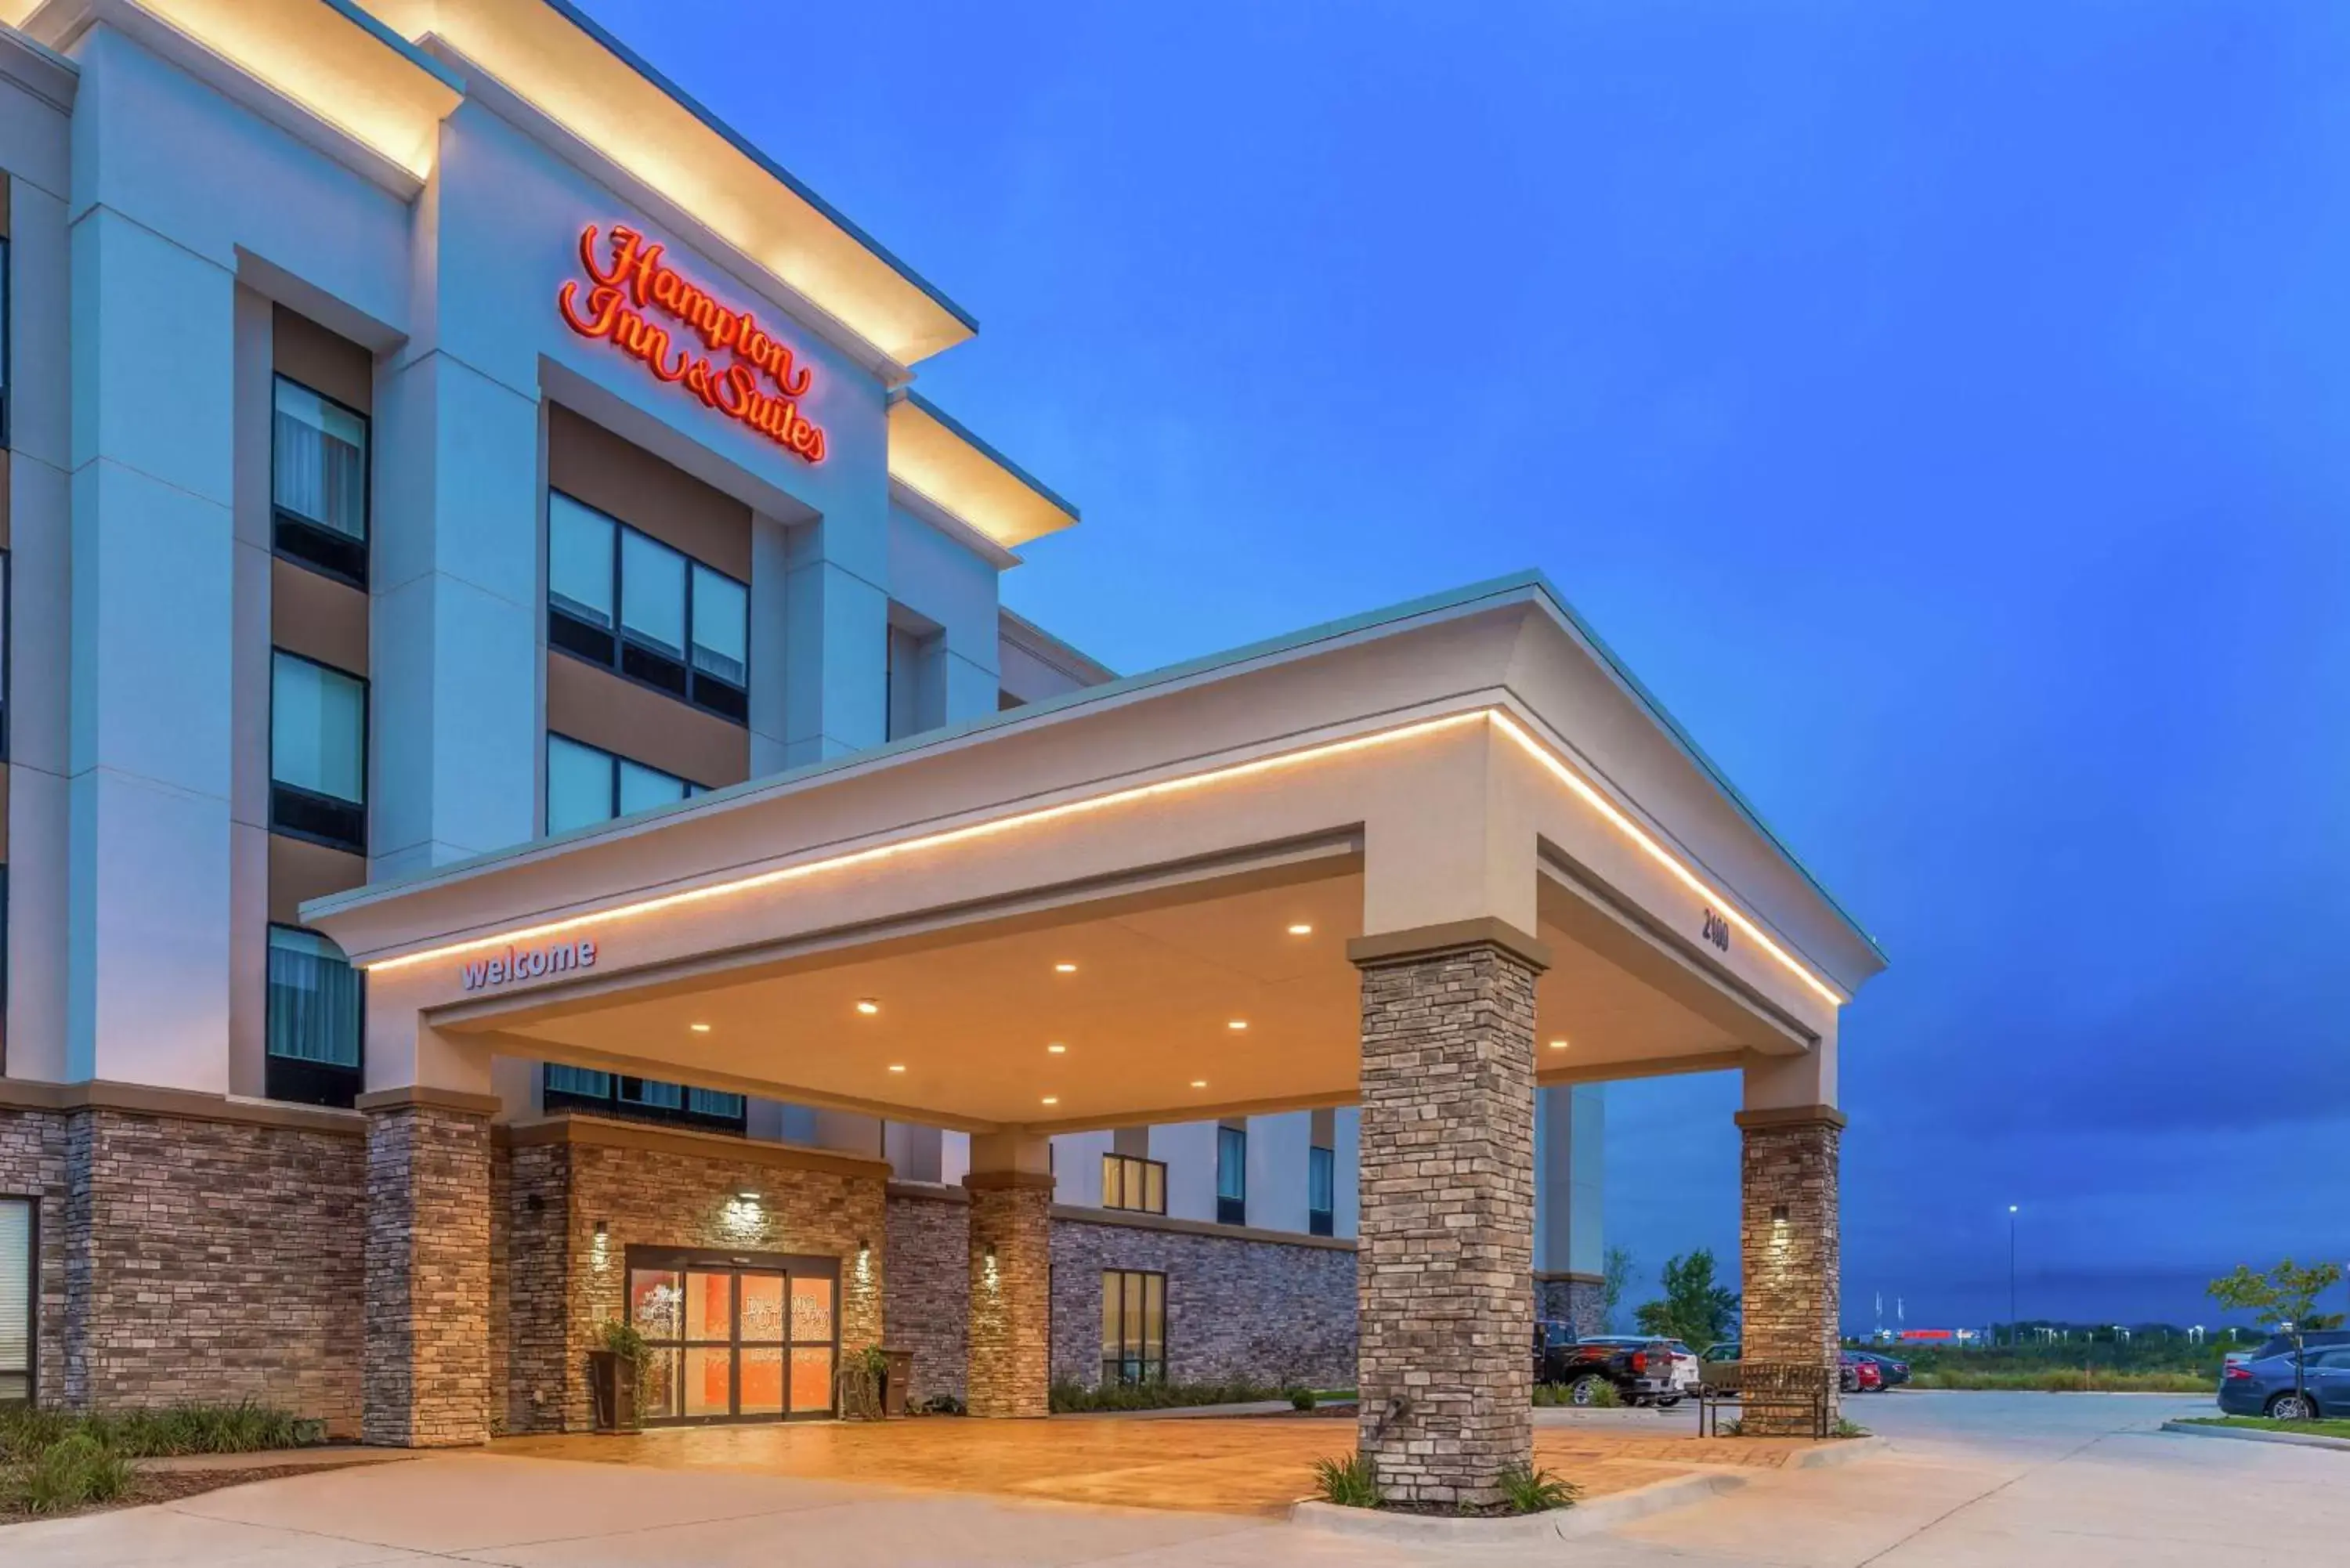 Property Building in Hampton Inn and Suites Ames, IA